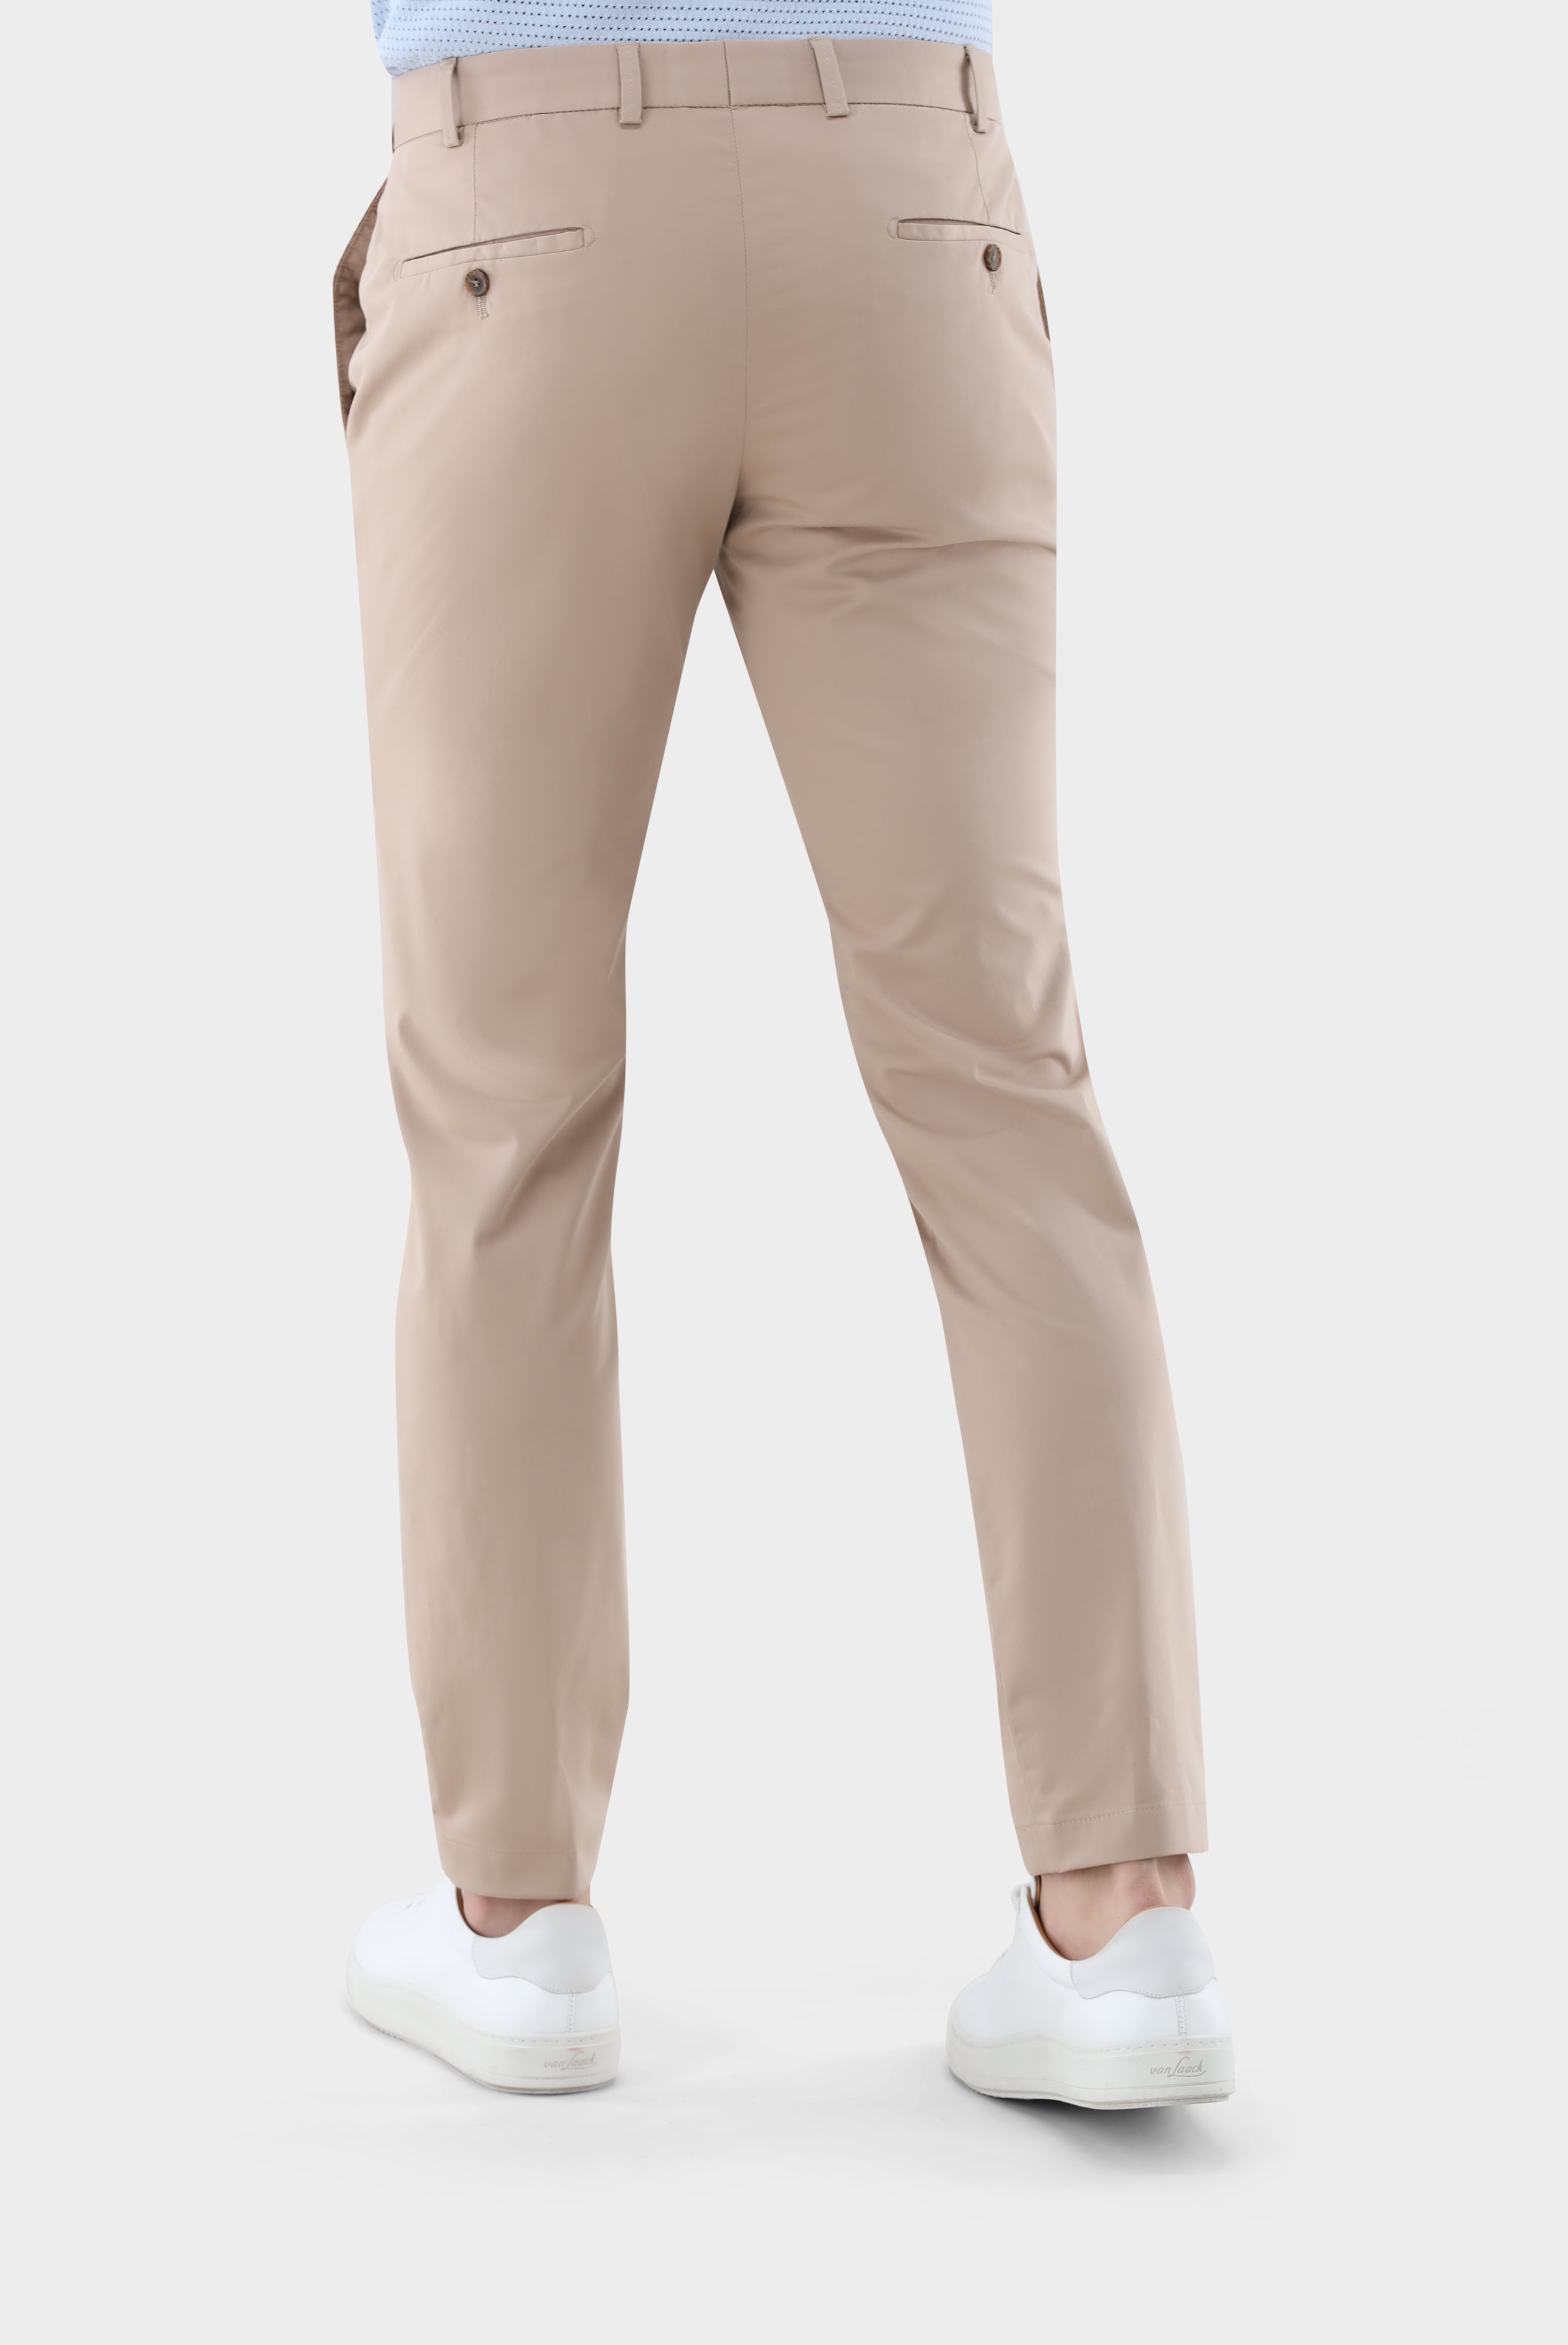 Jeans & Trousers+Cotton with Stretch Tapered Chinos+80.7858..J00151.140.54